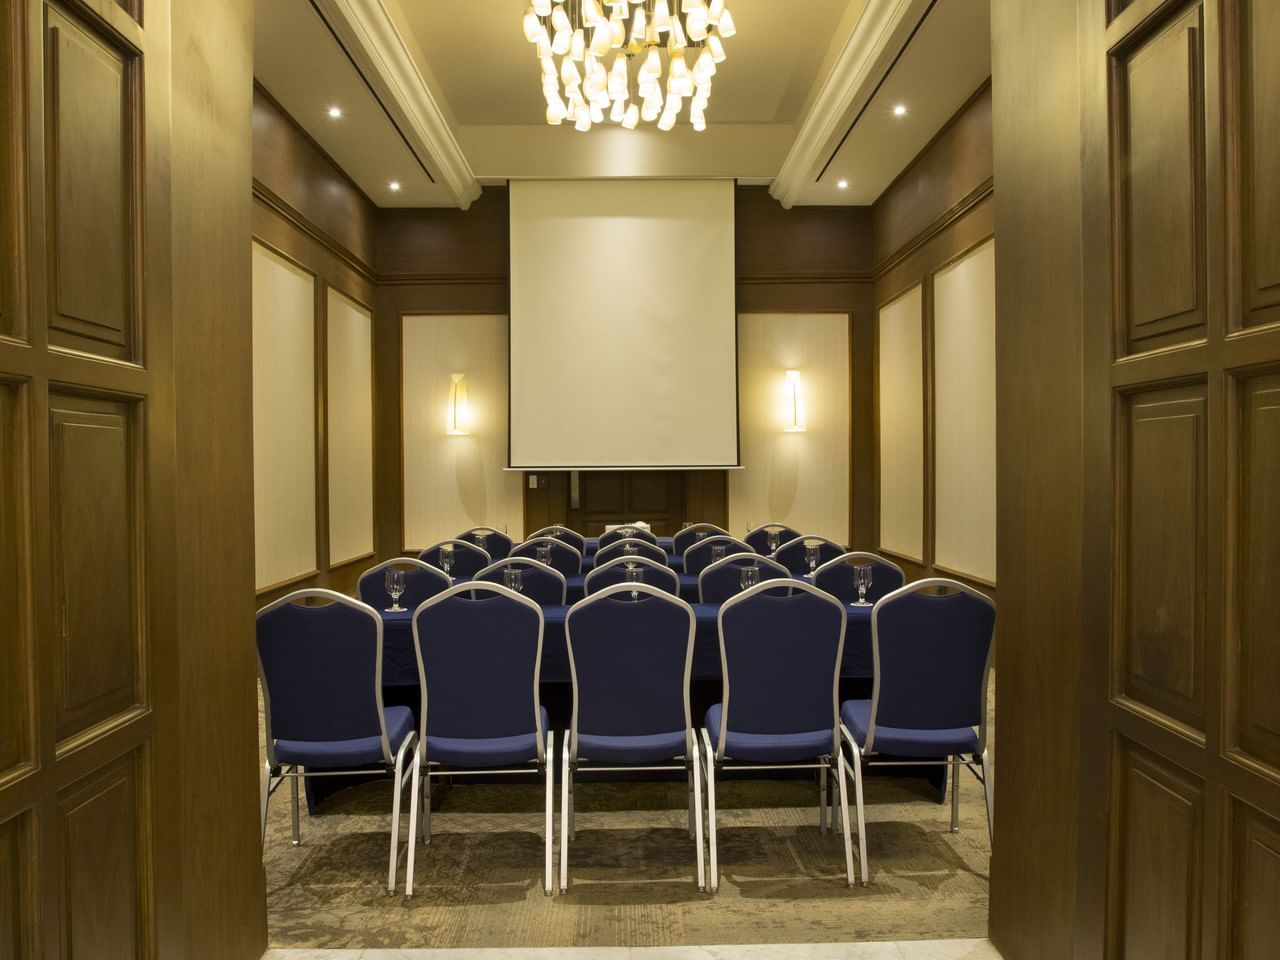 Chairs in Santa Lucia Meeting Room at La Coleccion Resorts